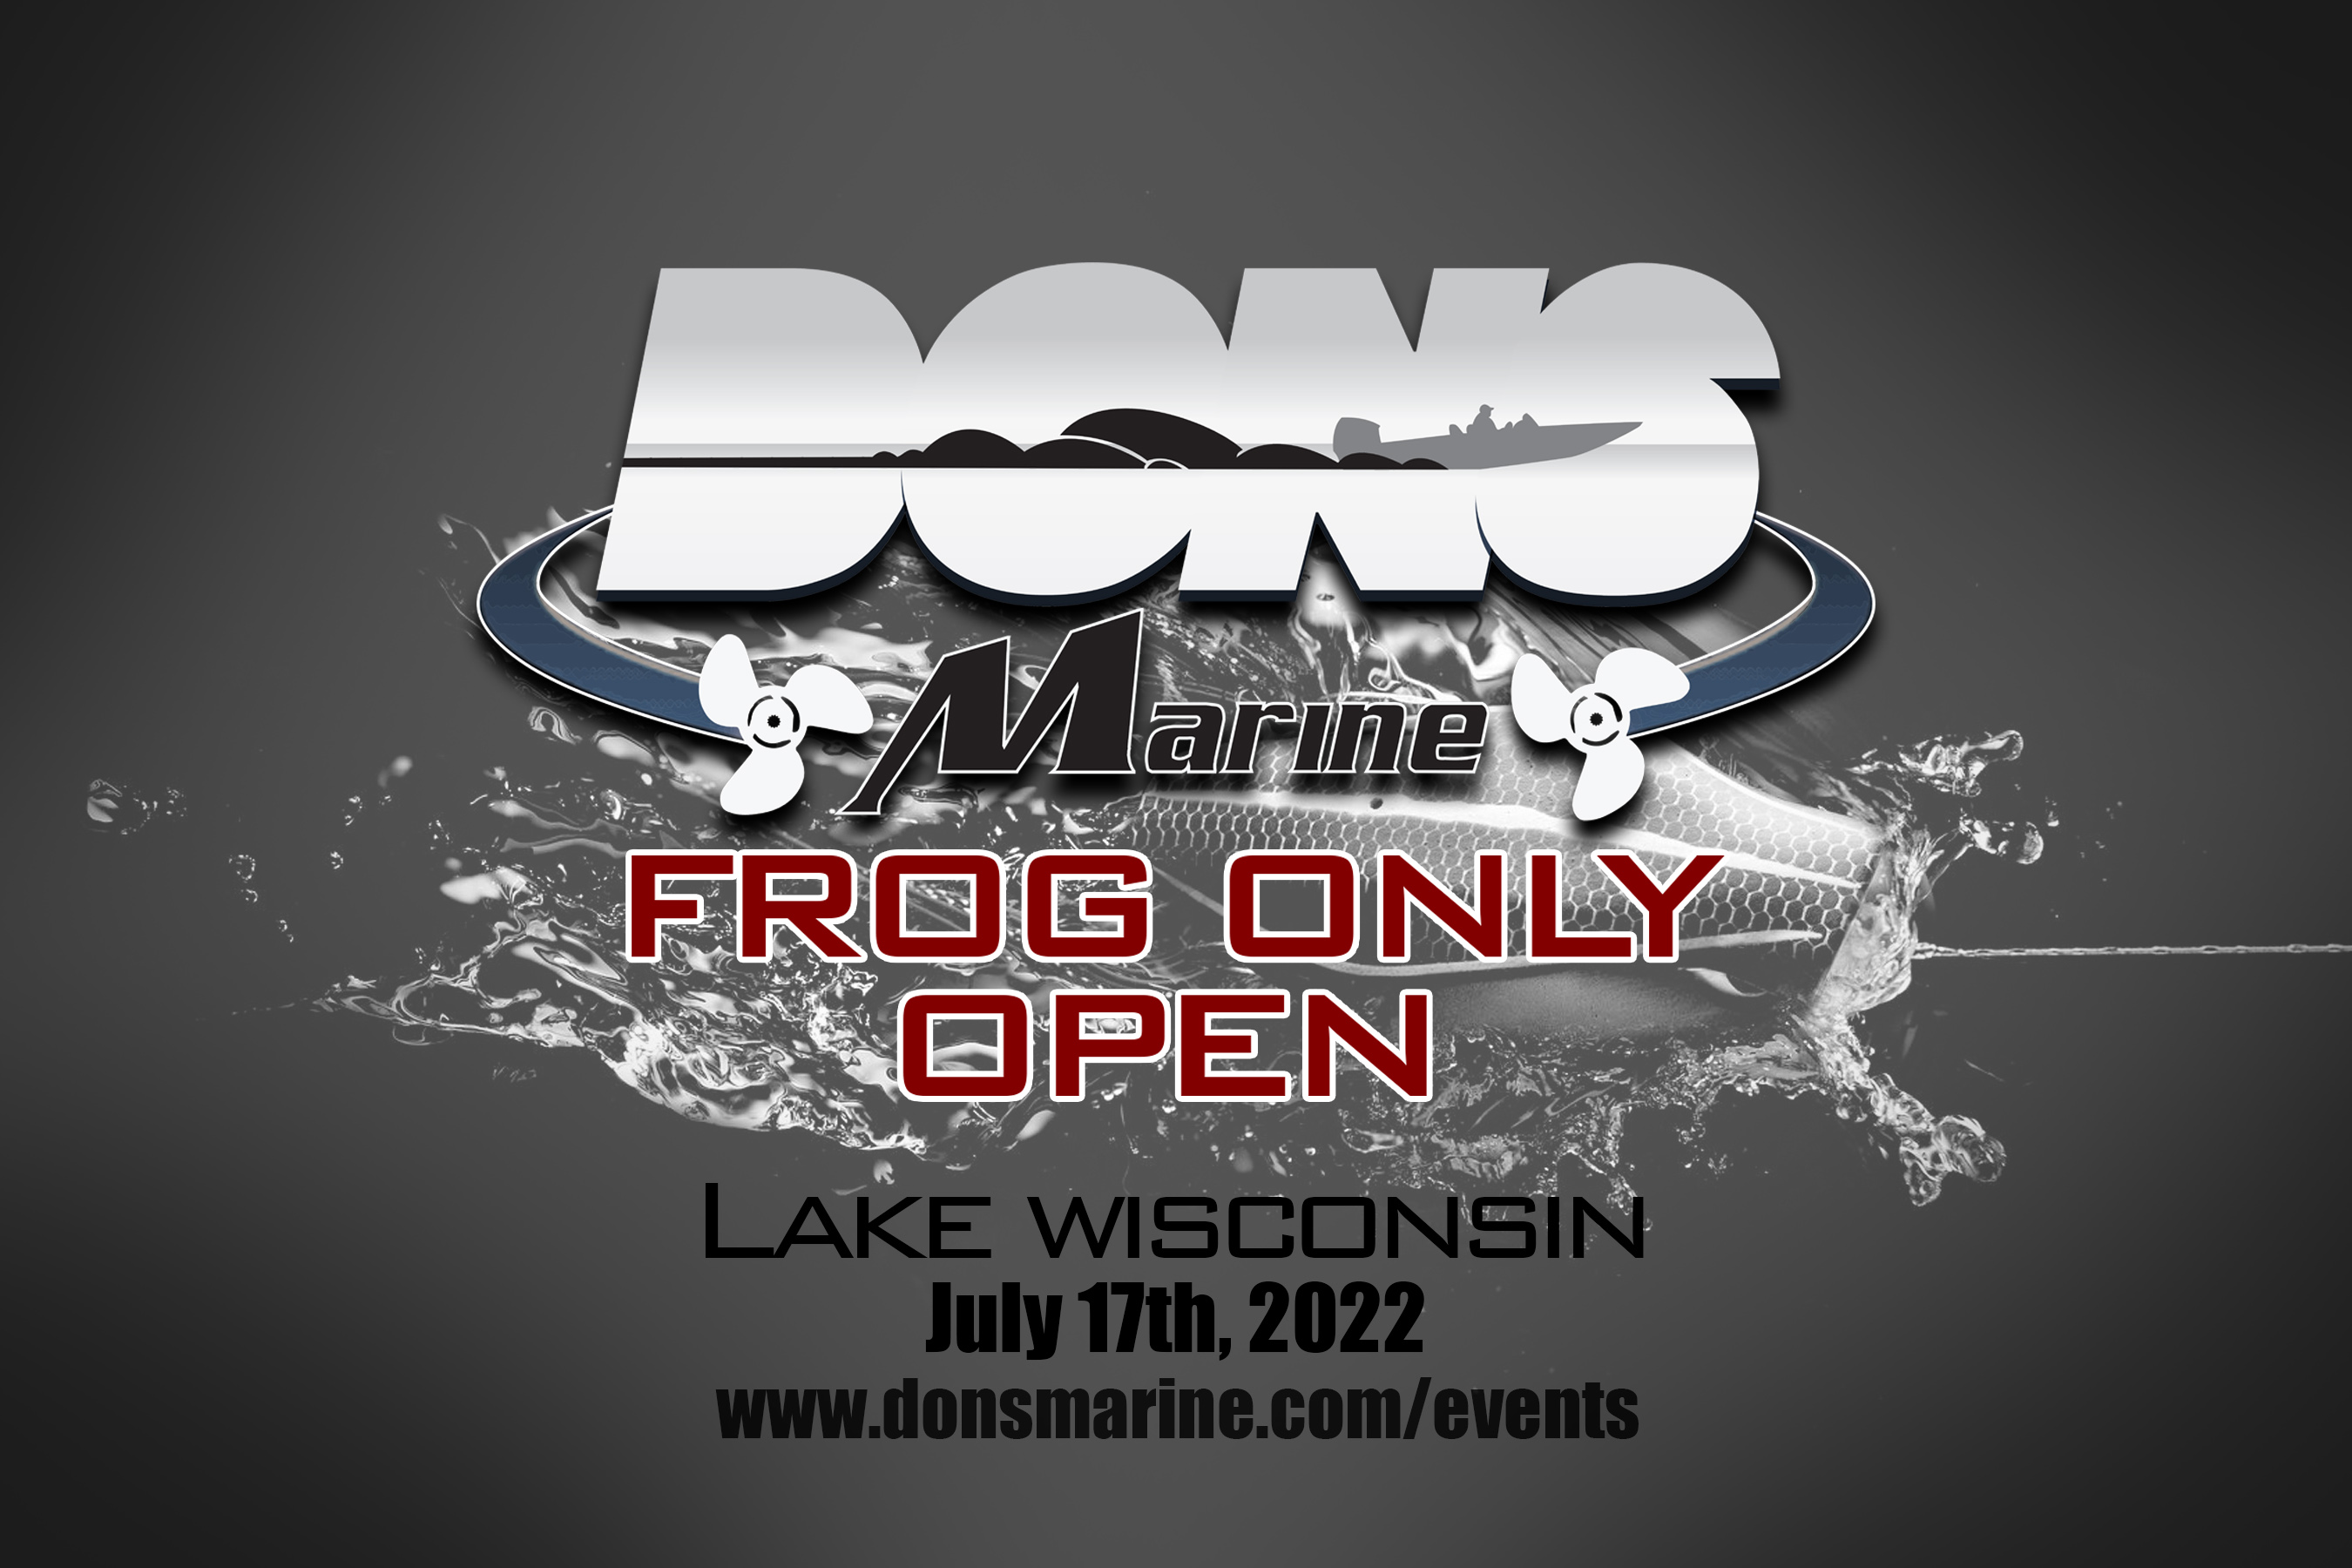 Don's Marine Frog Only Open event graphic